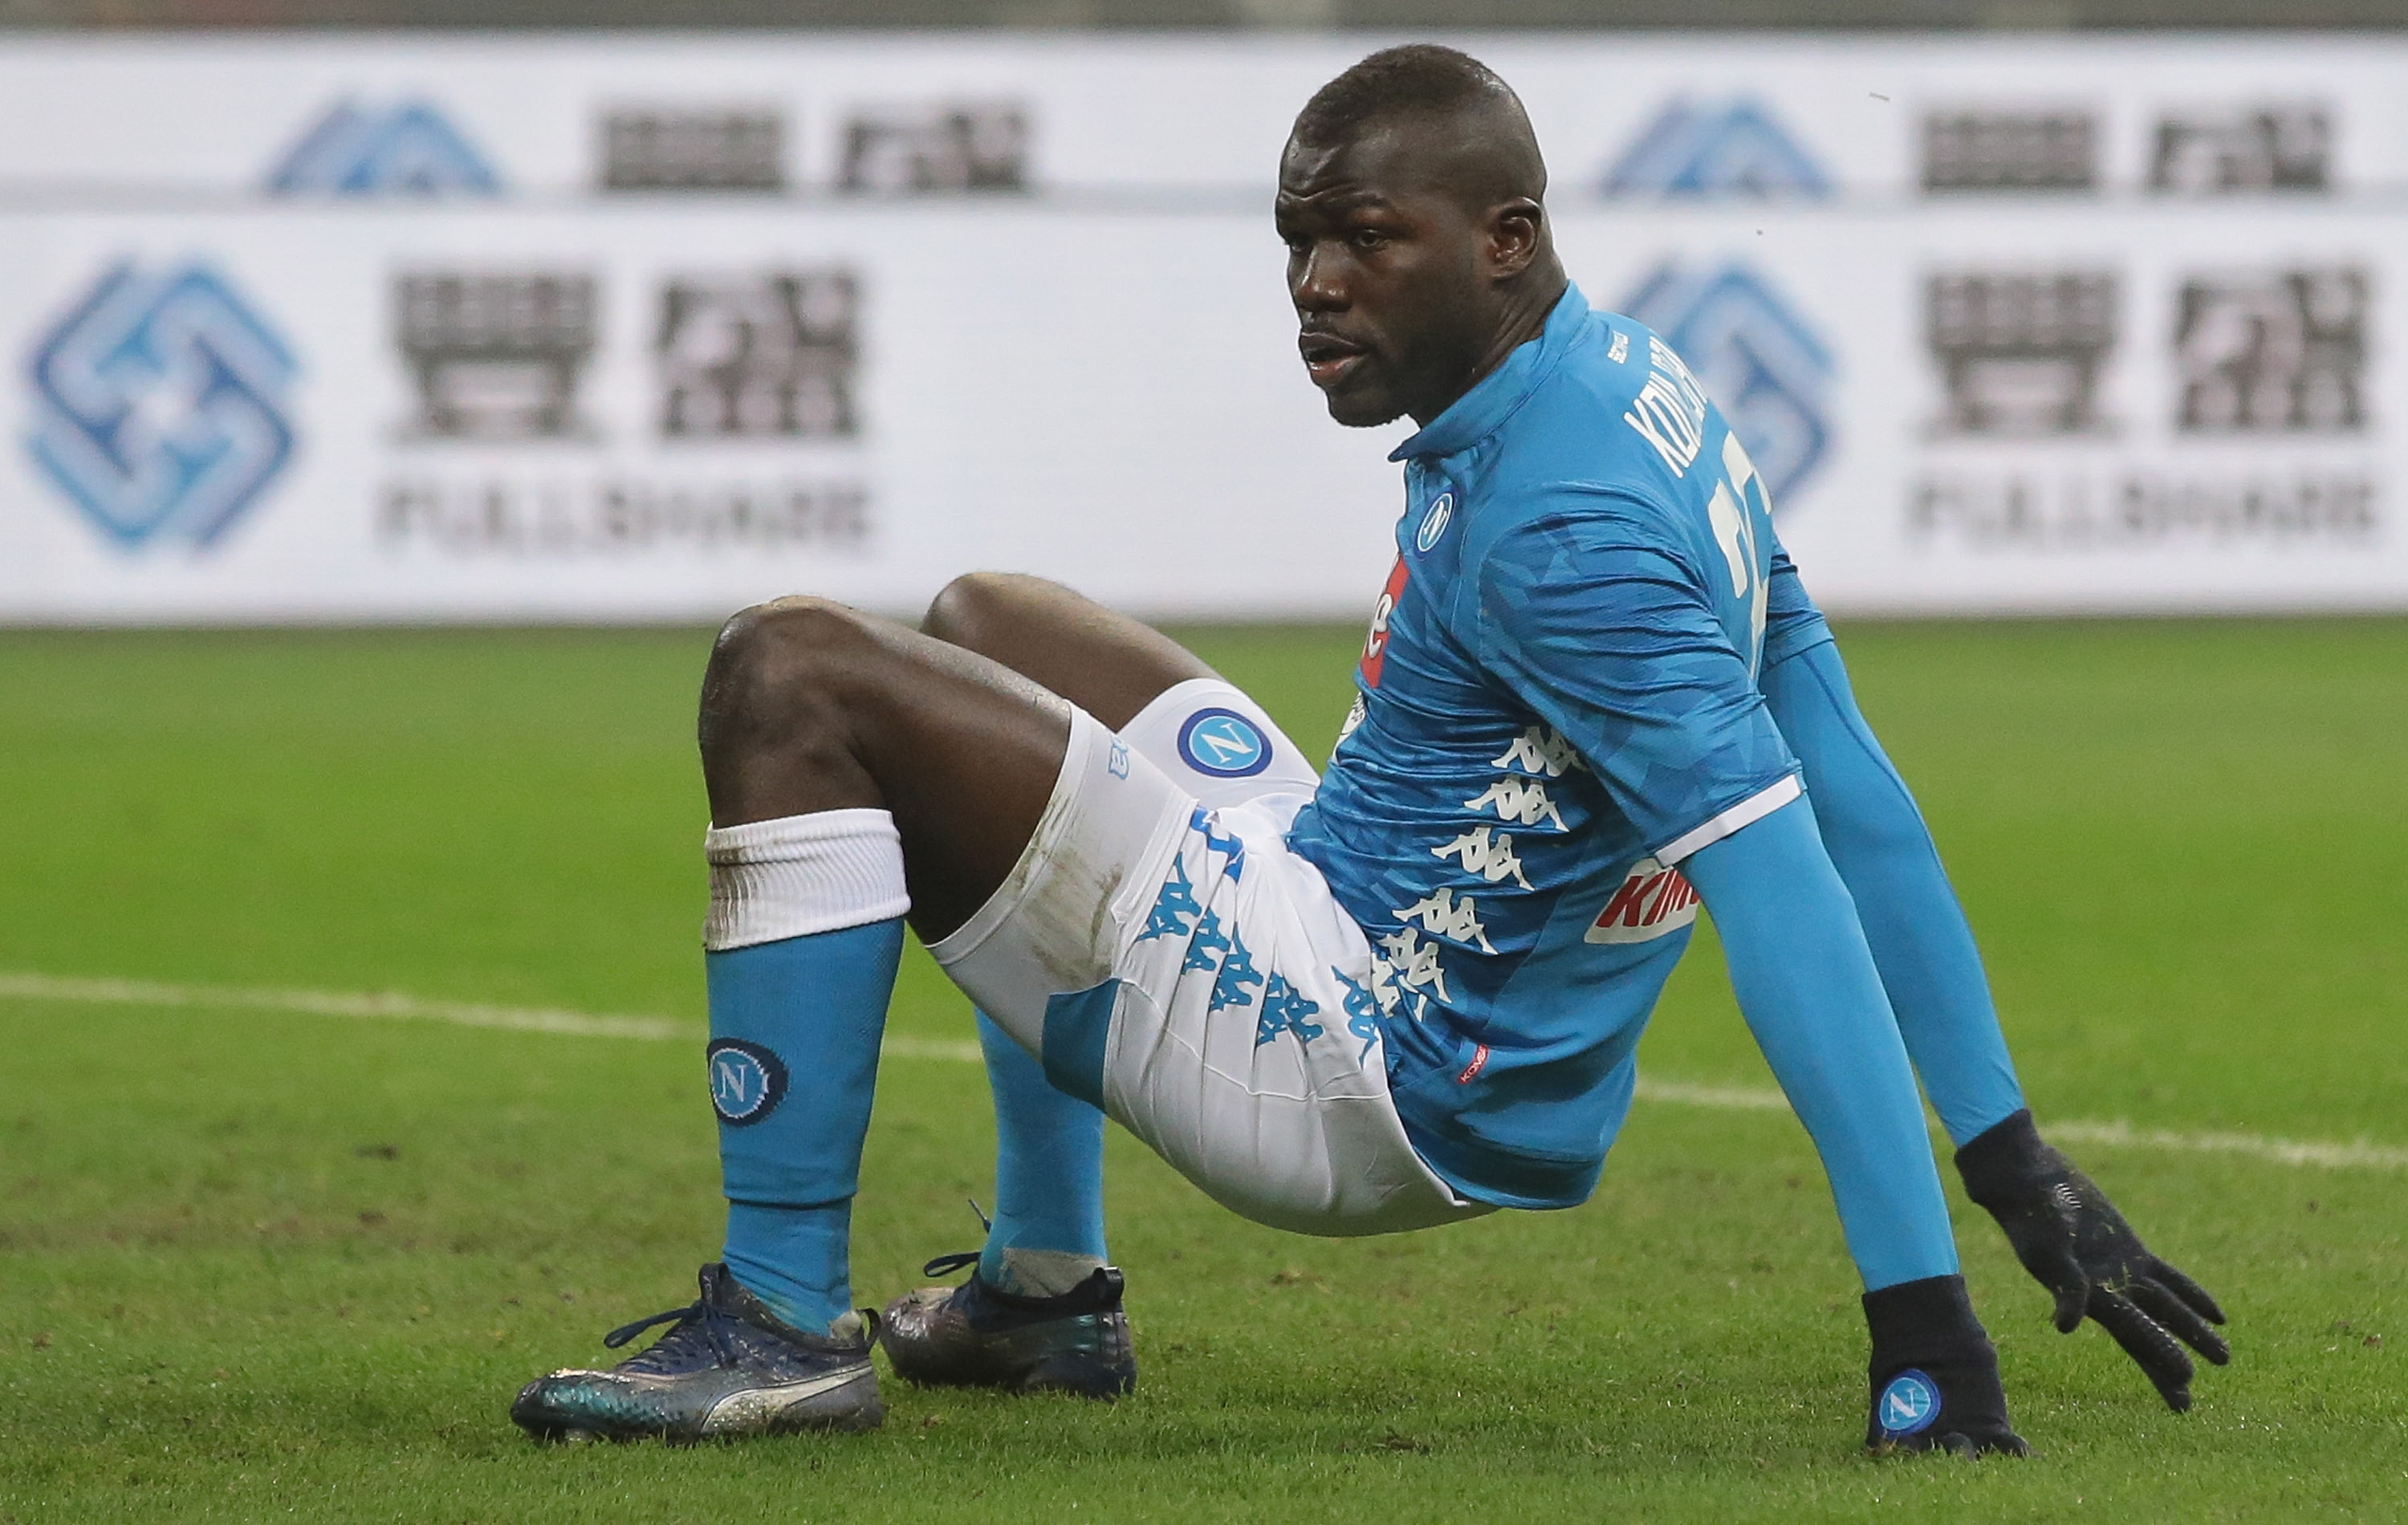 MILAN, ITALY - DECEMBER 26:  Kalidou Koulibaly of SSC Napoli looks on during the Serie A match between FC Internazionale and SSC Napoli at Stadio Giuseppe Meazza on December 26, 2018 in Milan, Italy.  (Photo by Emilio Andreoli/Getty Images)